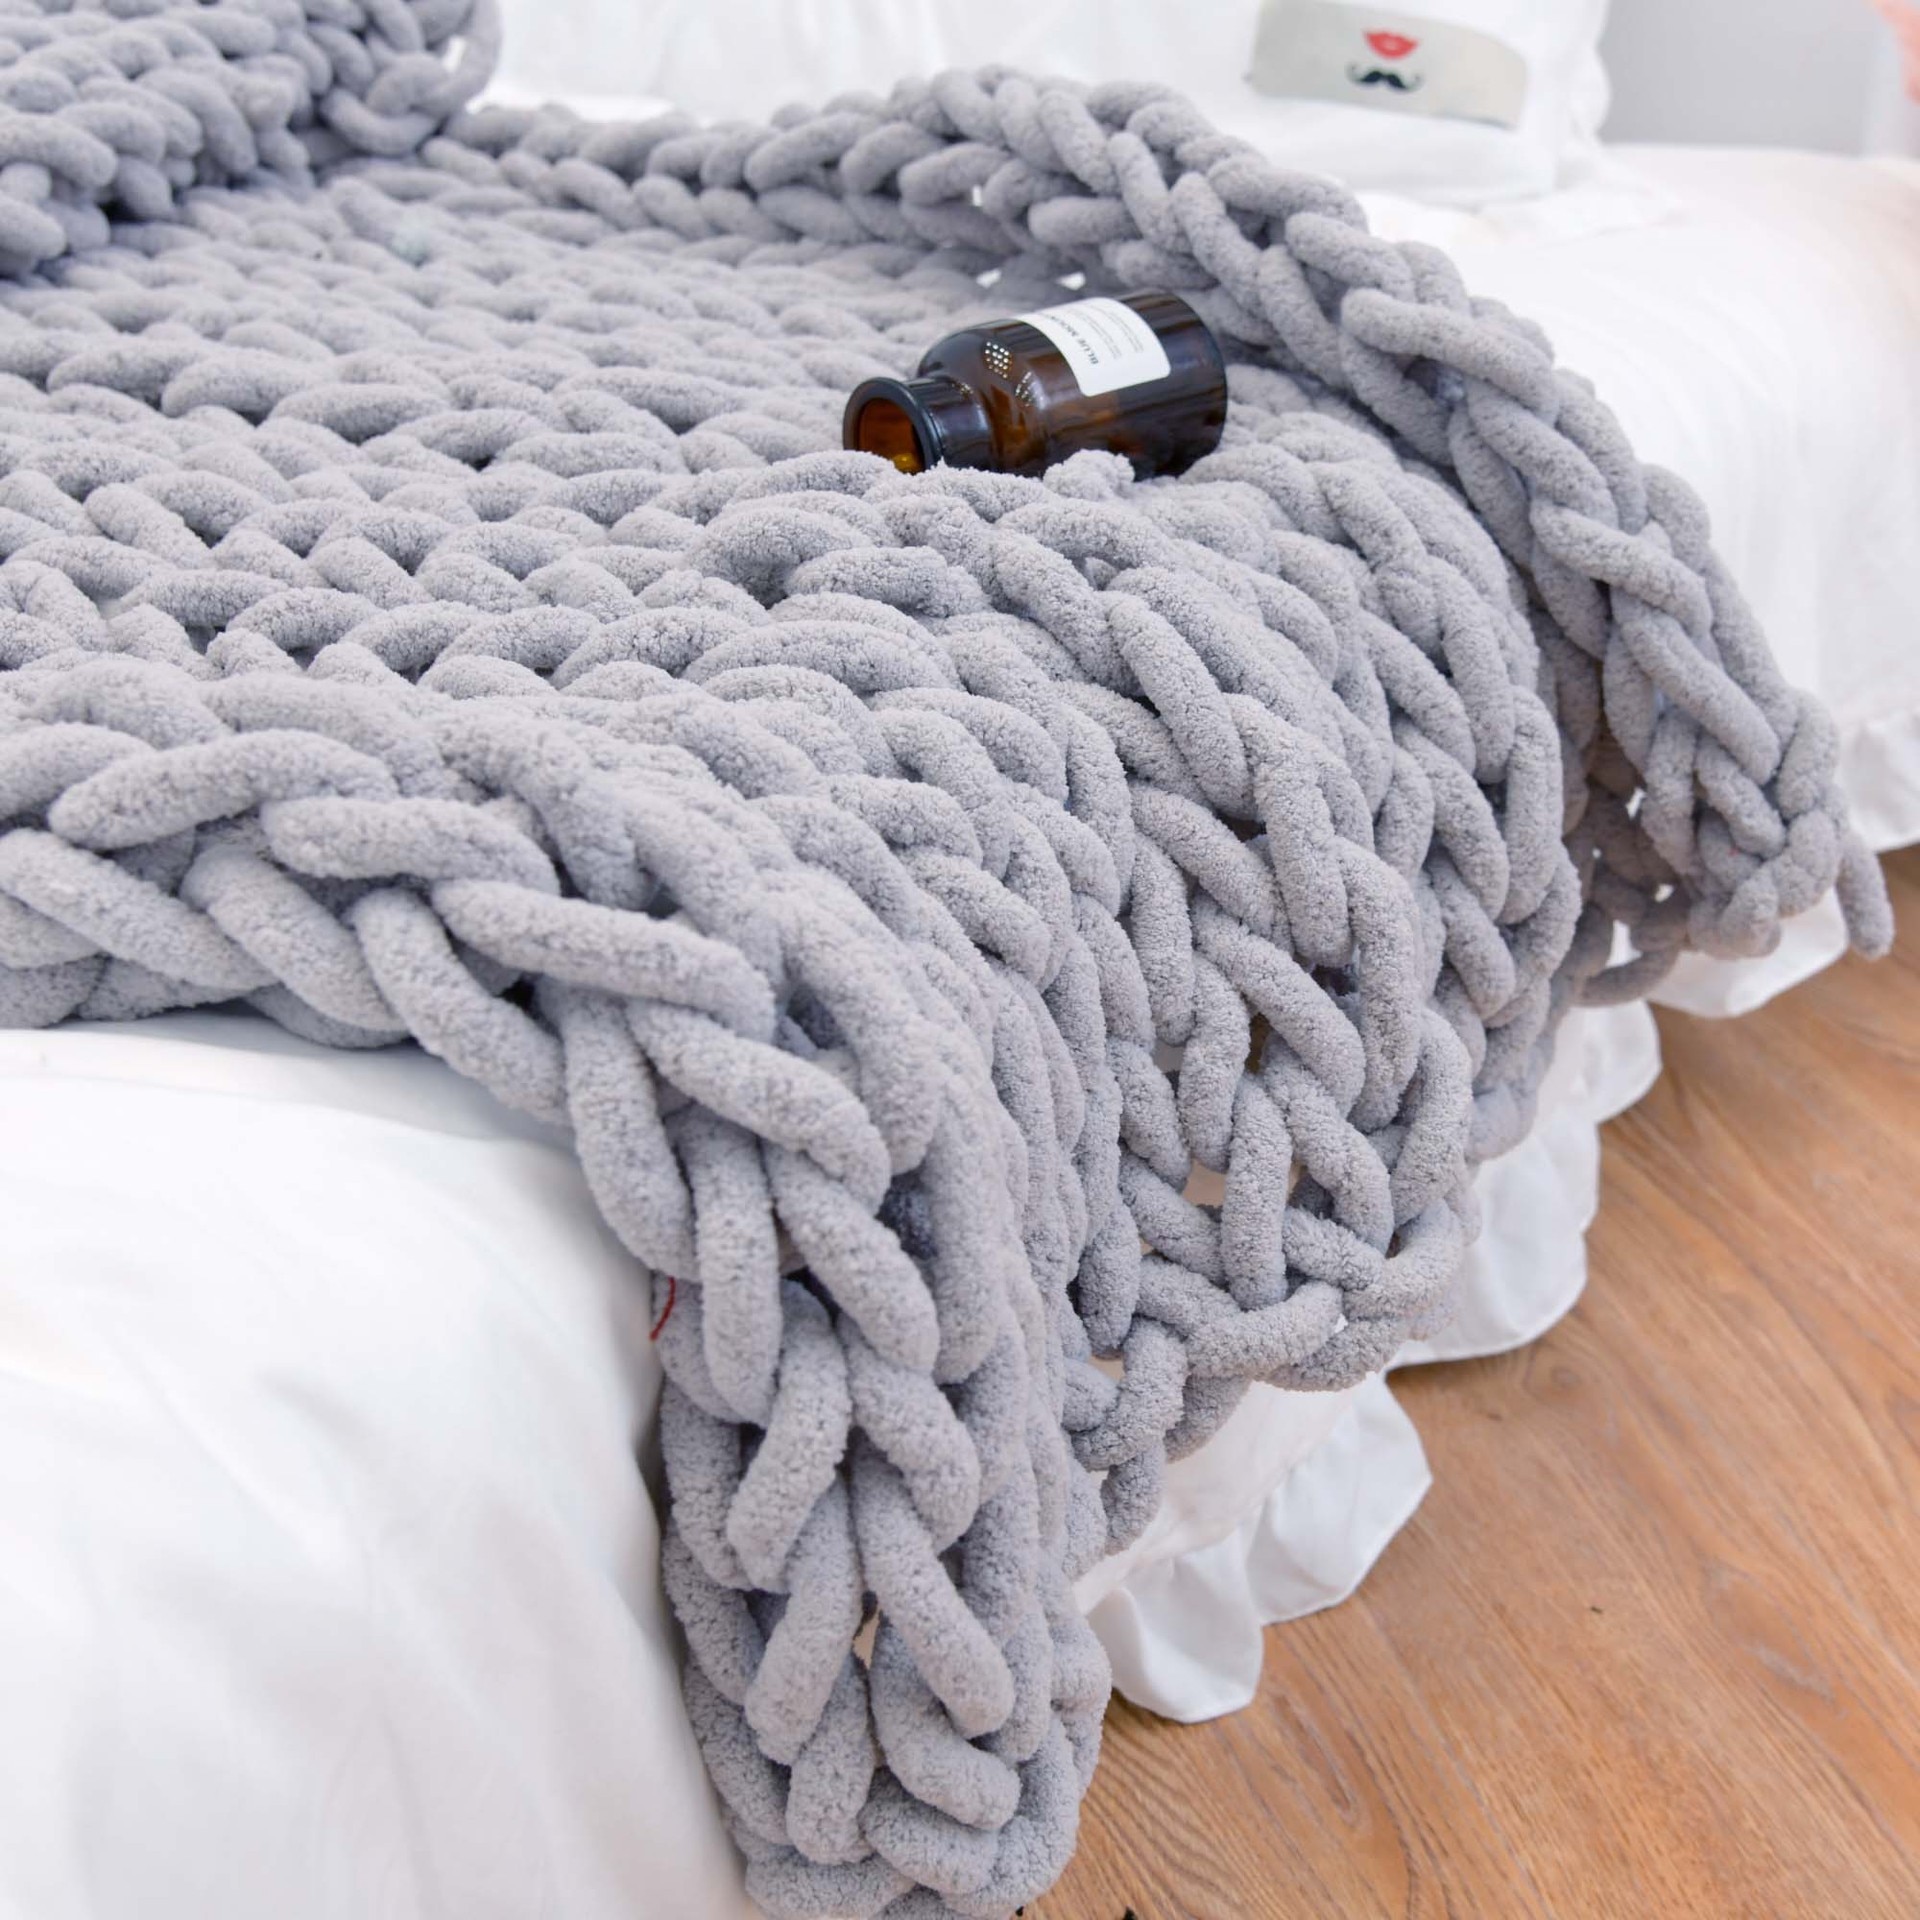 Chenille Chunky Knitted Blanket Weaving Blanket Mat Throw Chair Decor Warm Yarn Knitted Blanket